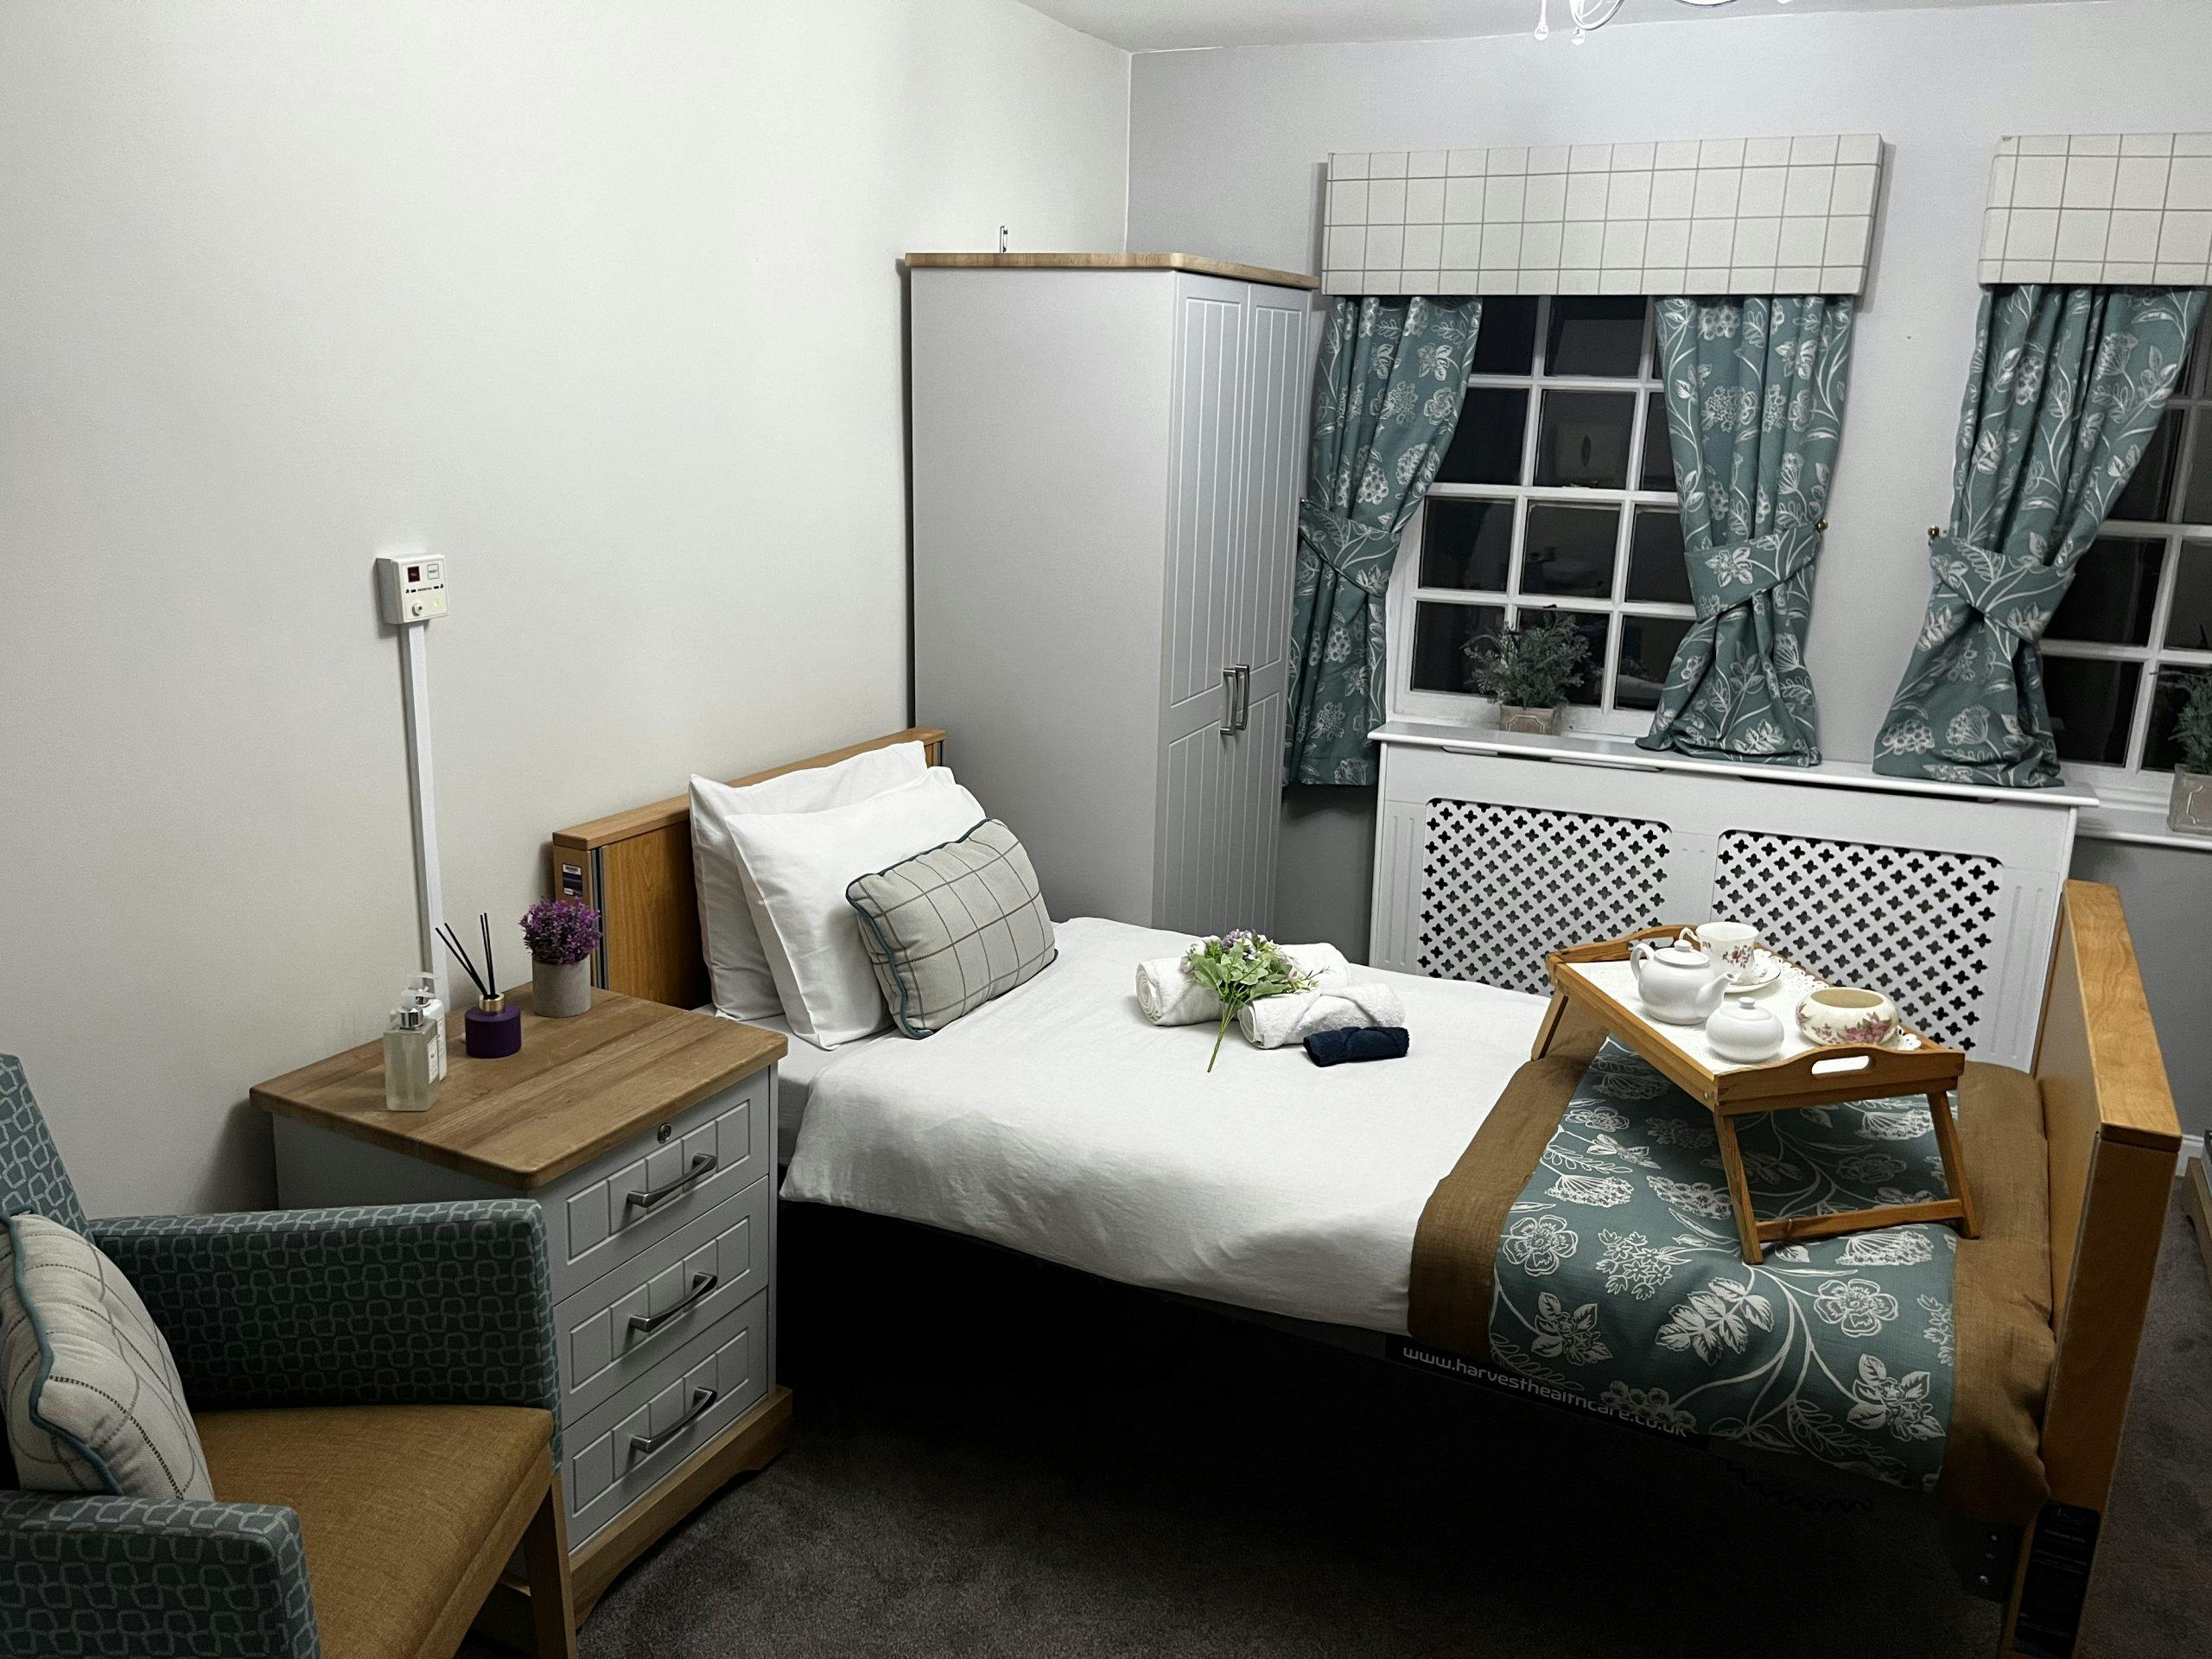 Bedroom of Northleach Court care home in Cheltenham, Gloucestershire